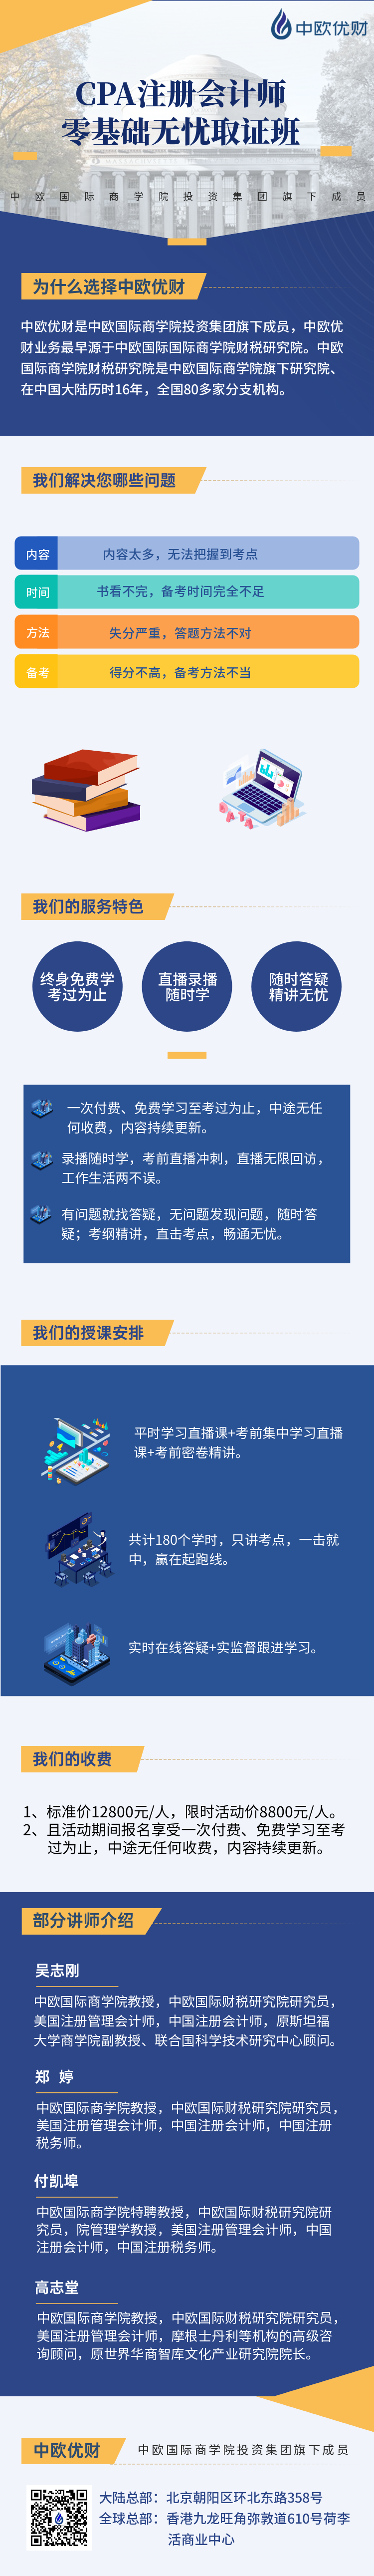 CPA长图.png